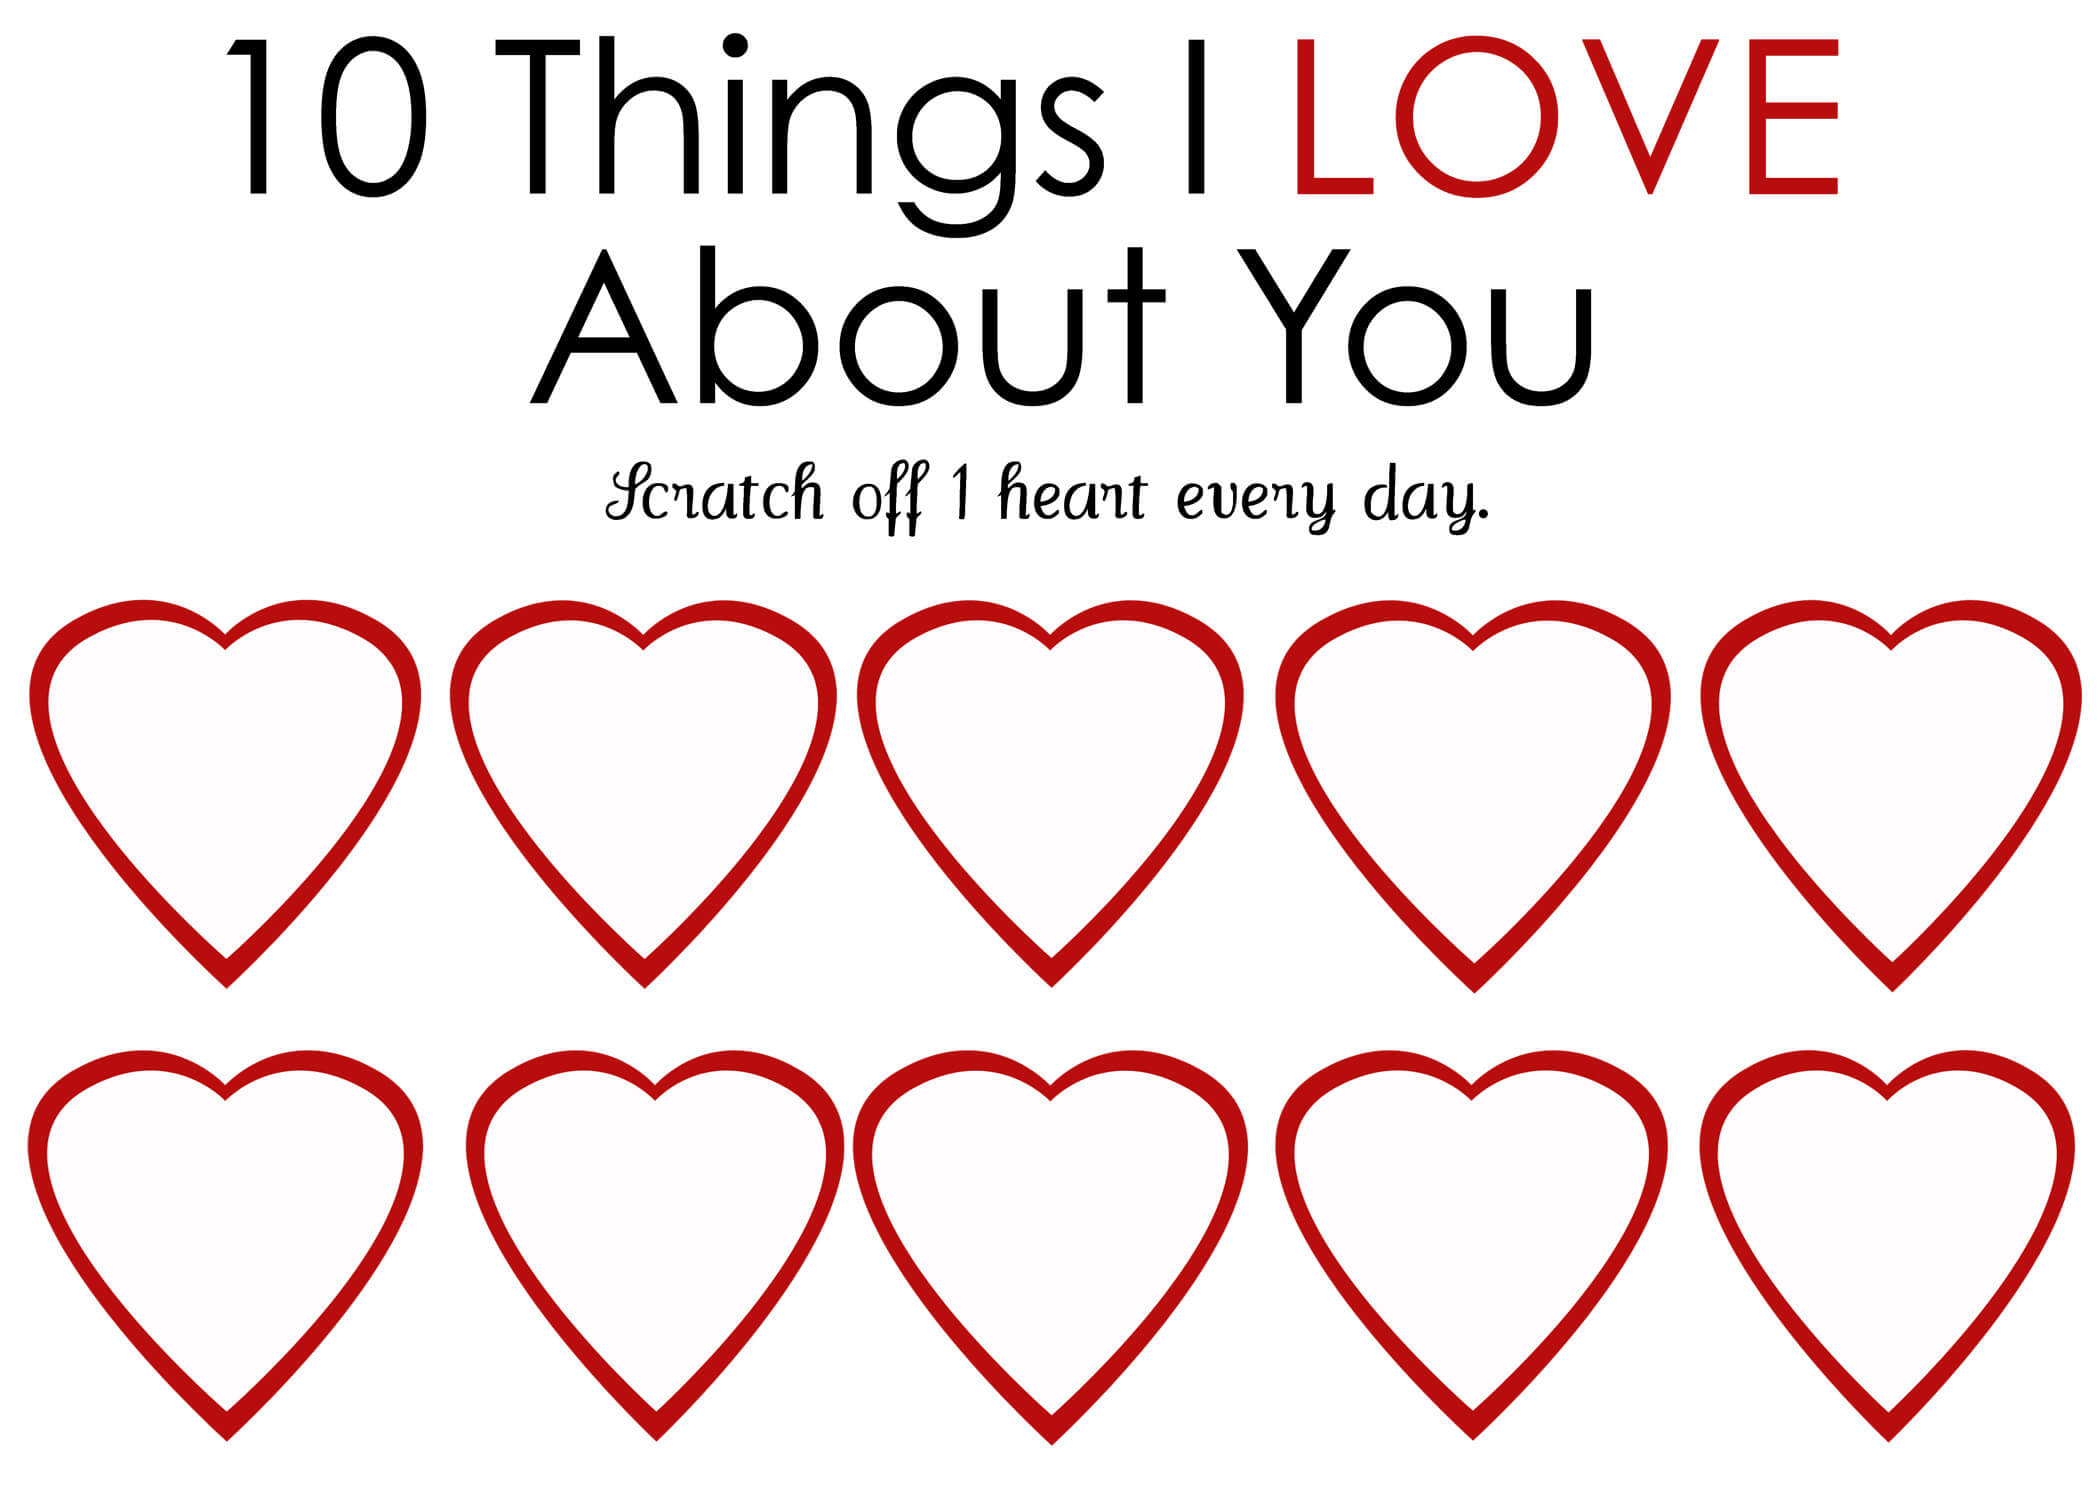 Printable Scratch Off Card {Easy Peasy Valentine} Within 52 Things I Love About You Cards Template